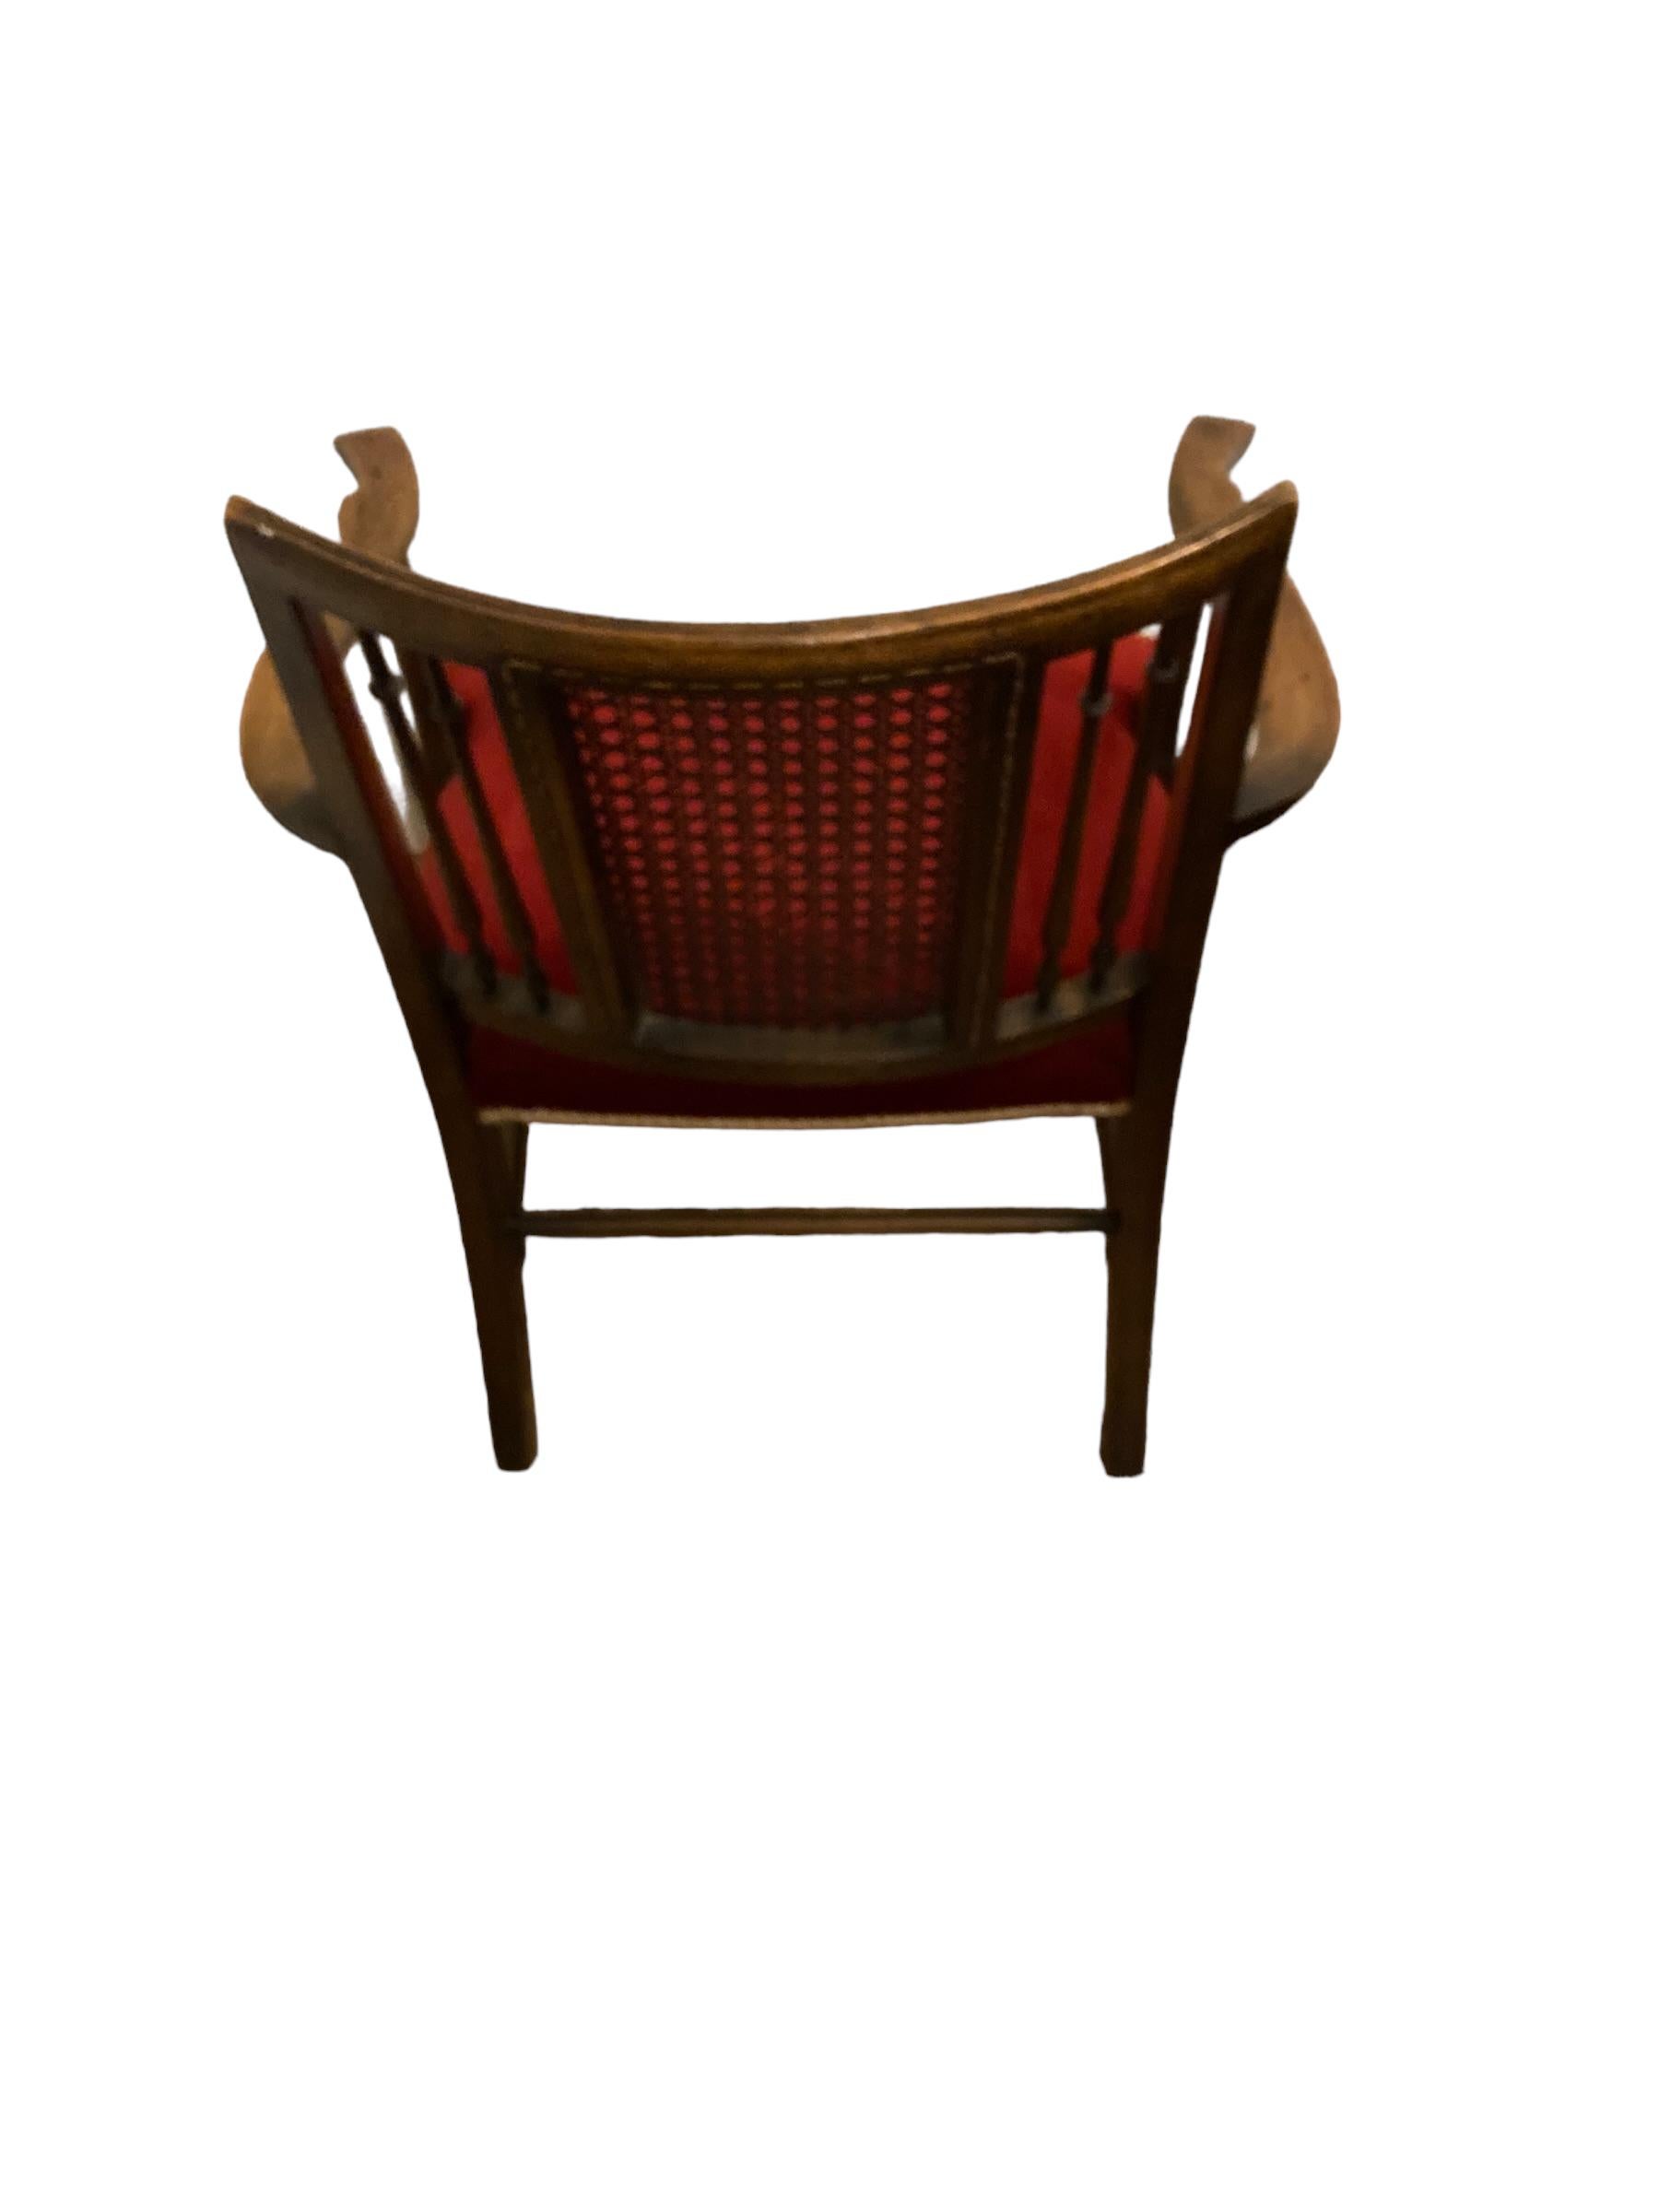 A rare Antique Beech Wood X Framed Cane back Arm chair. With its unusual Savonarola looking frame makes this wonderful chair both charming and a practical hall or bedroom chair that fits in to any design of interior. A solid structure with a new red